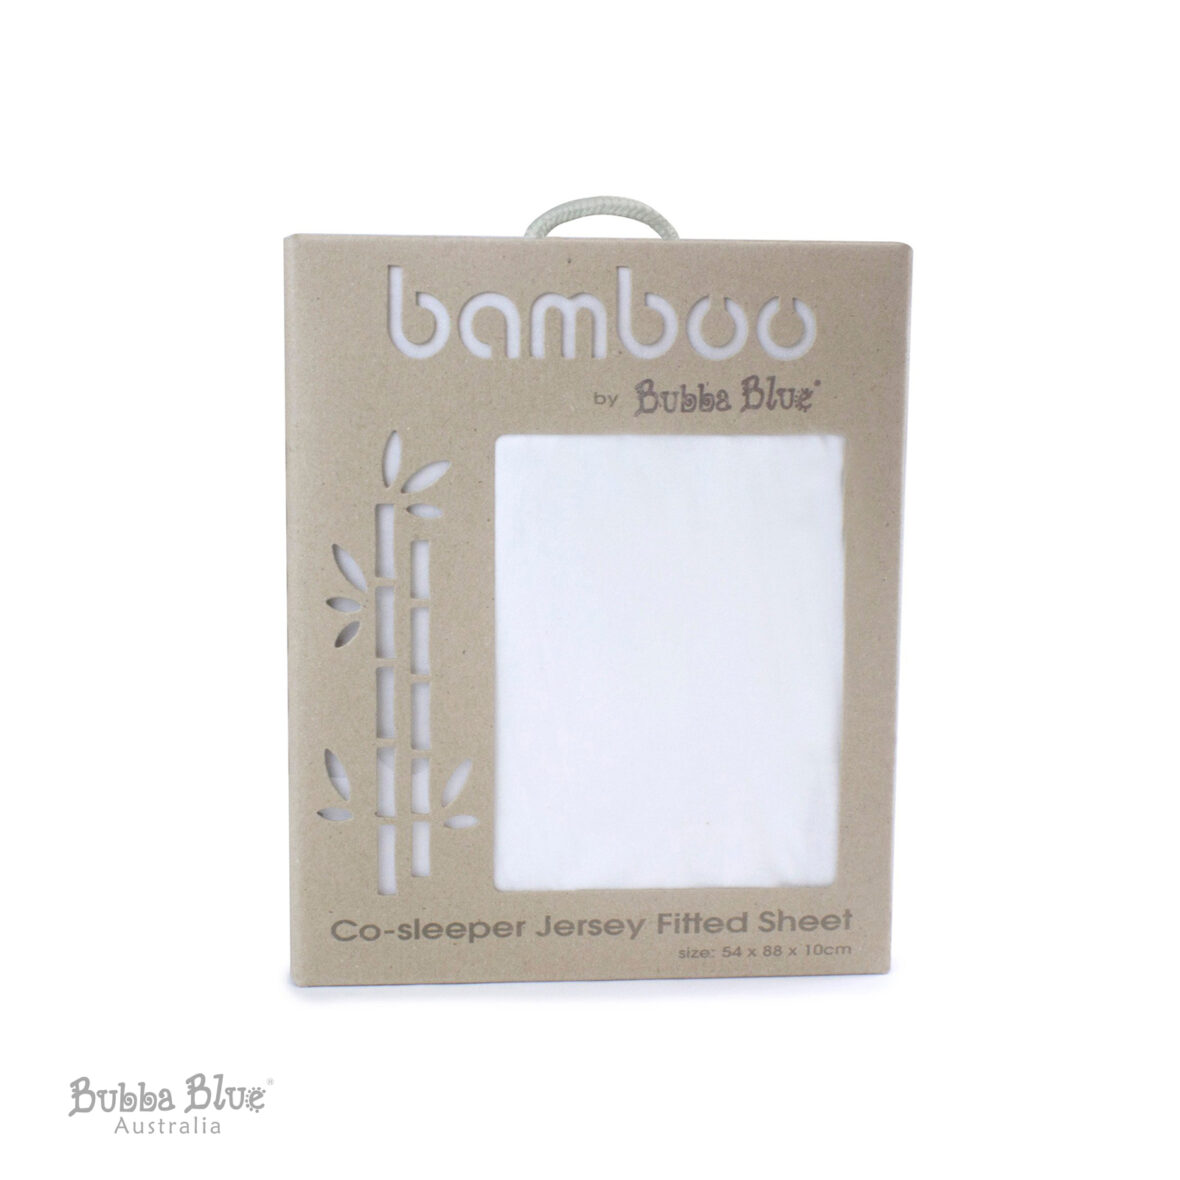 Bubba Blue Bamboo Co-Sleeper Fitted Sheet